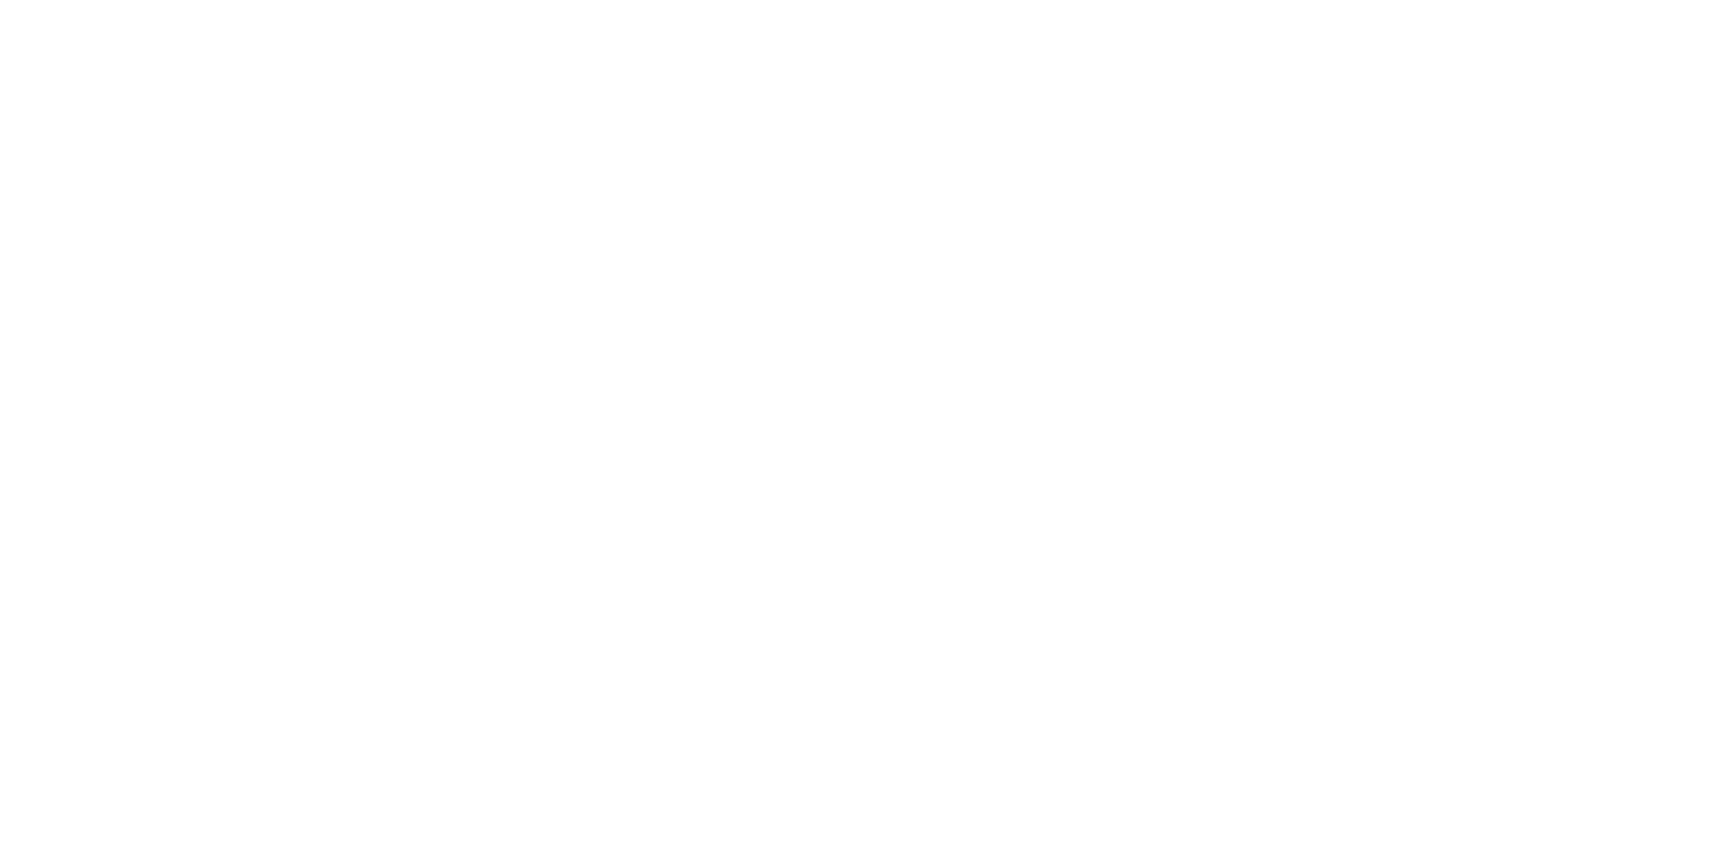 MERIDIAN TREEHOUSE LOGO H2-8.png